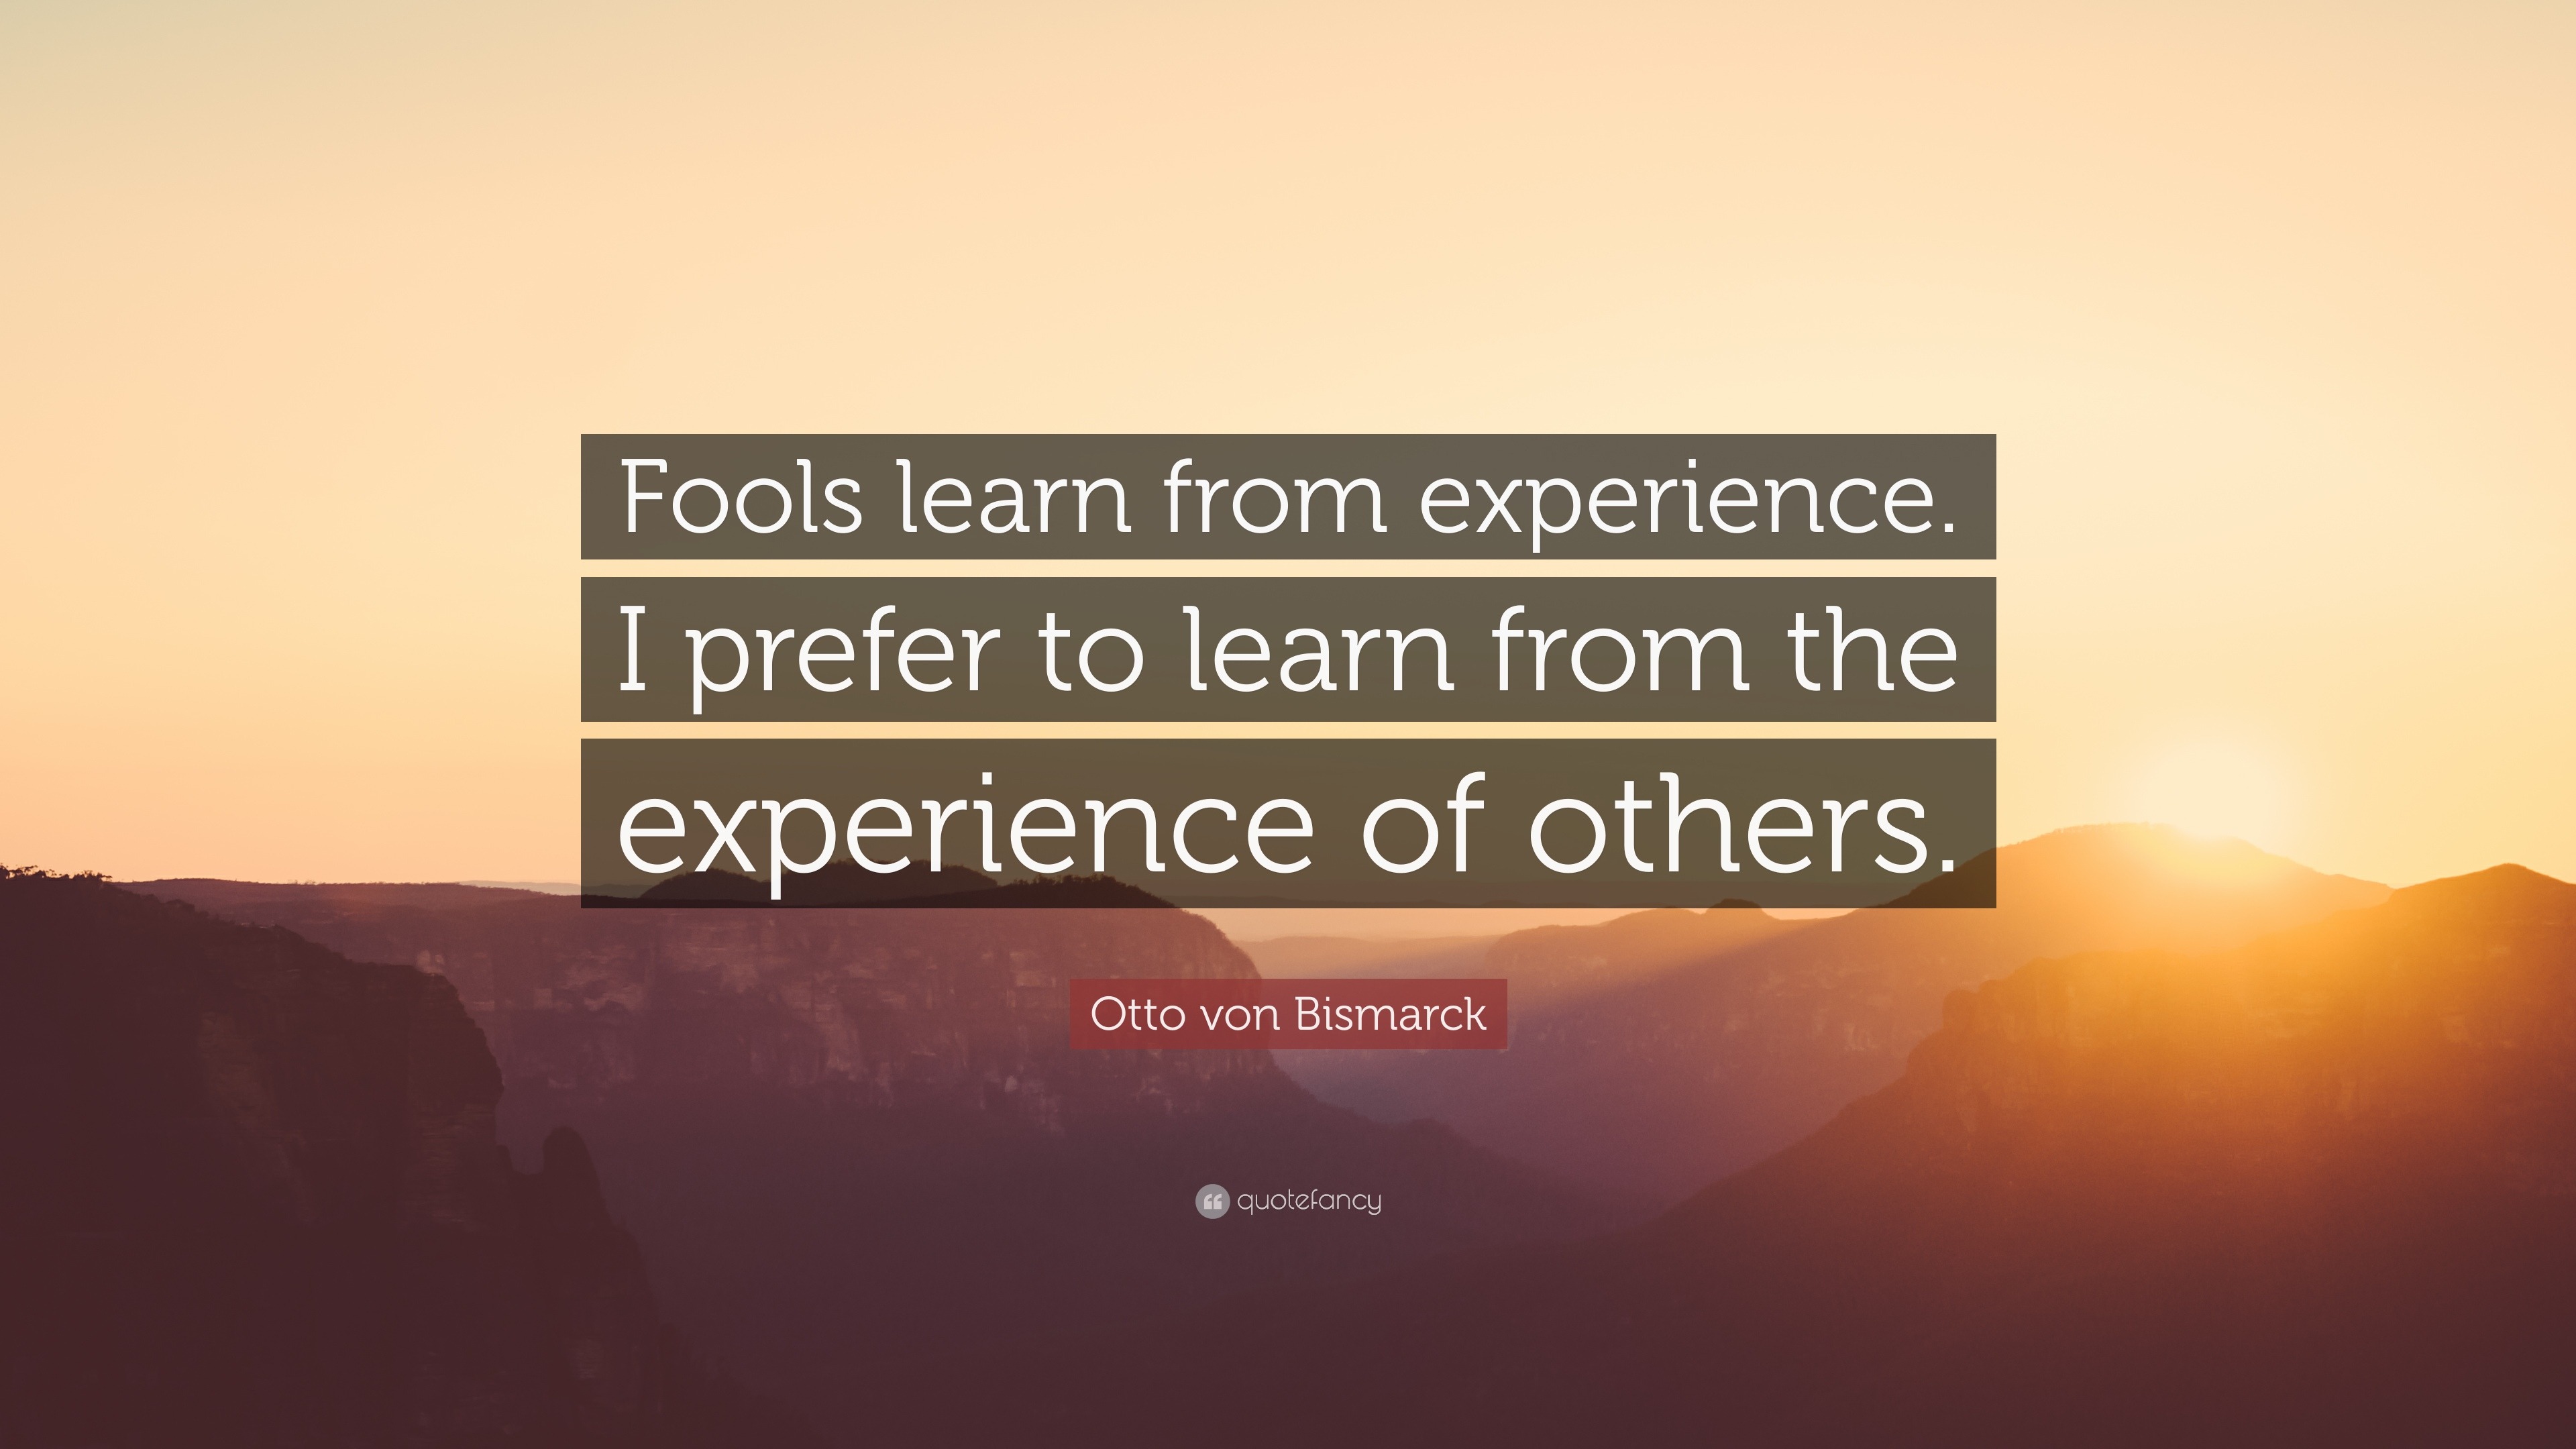 Otto von Bismarck Quote: “Fools learn from experience. I prefer to